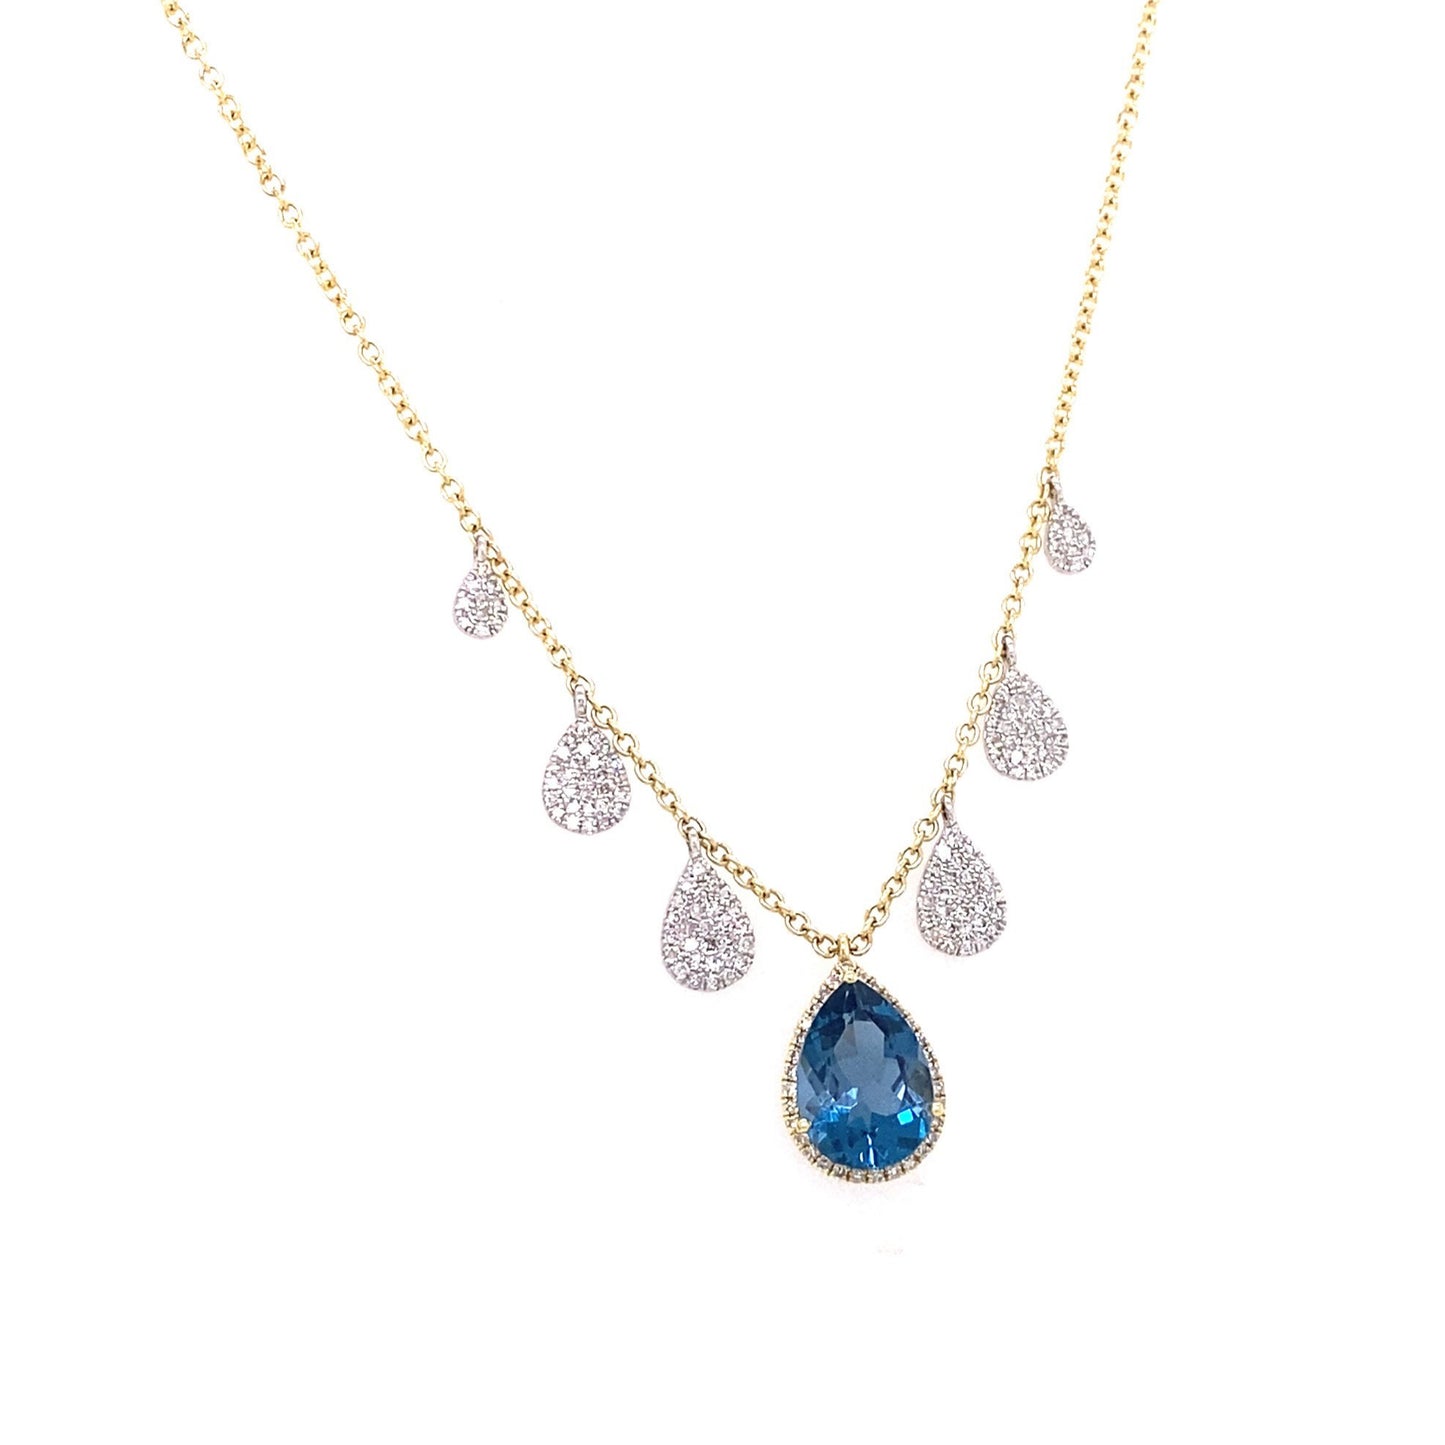 Meira T 14kt Yellow Gold Pear Shape London Blue Topaz and Diamond Charm Necklace